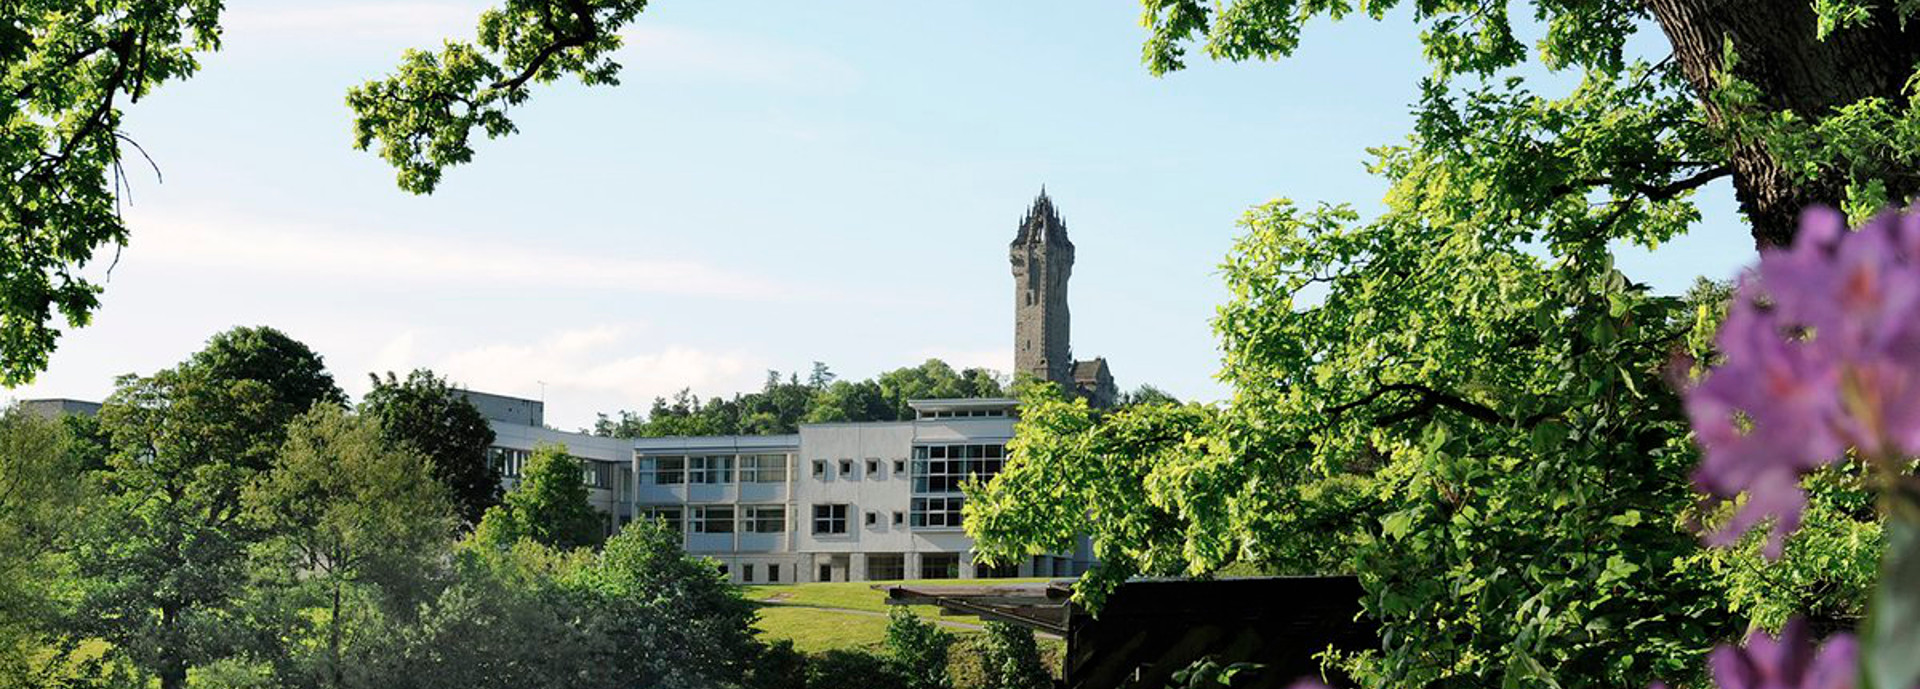 An image of the university campus